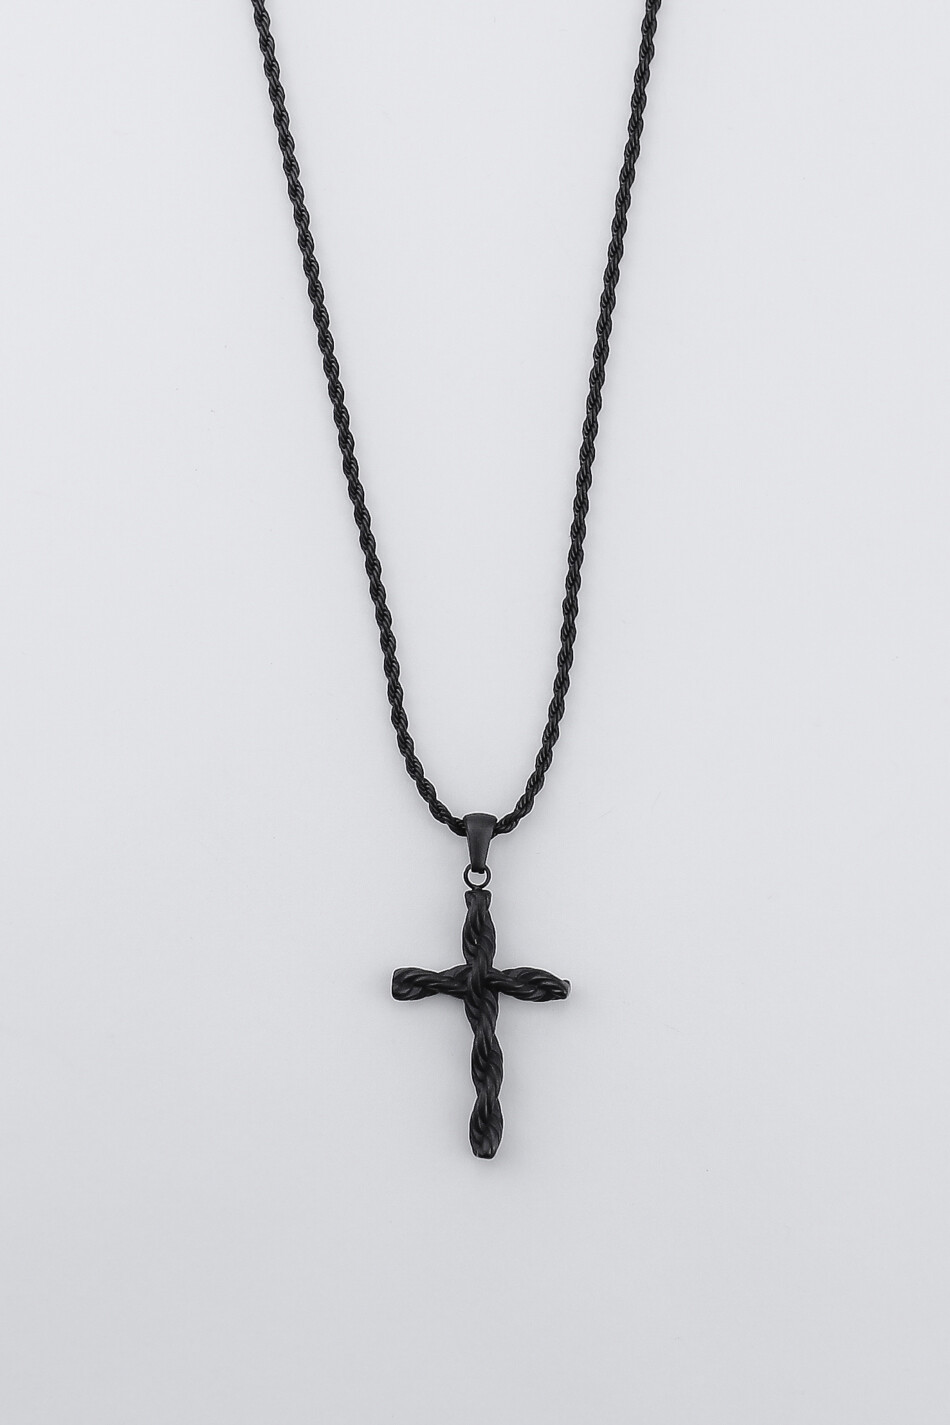 Black Chain with a small pendant Cross-harness